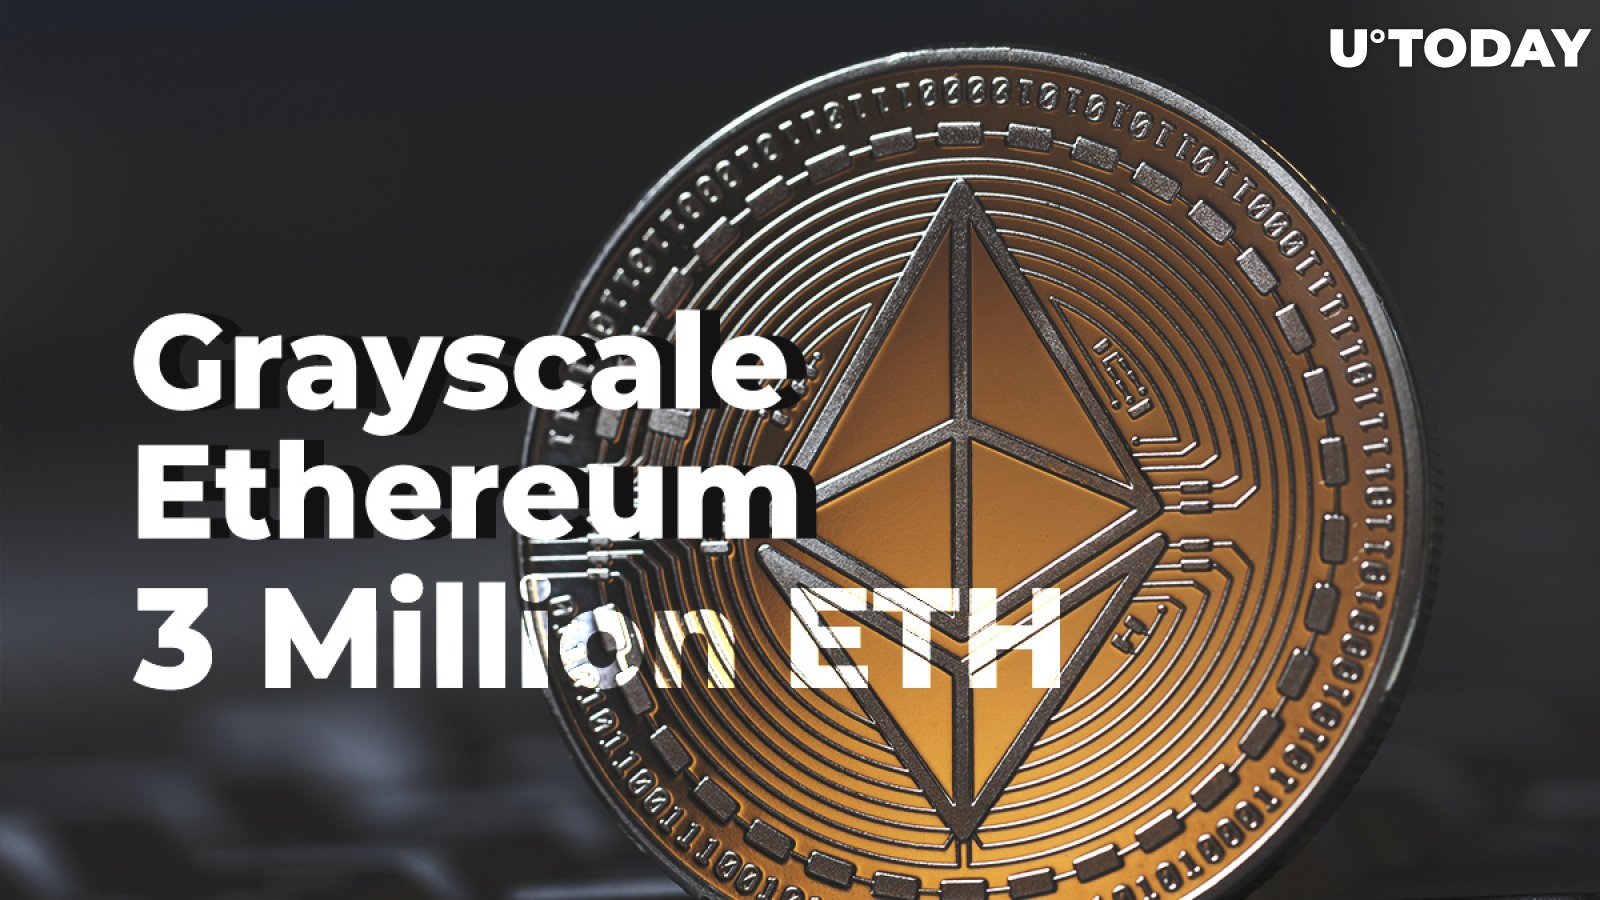 Grayscale's Ethereum Holdings Approaching 3 Million ETH